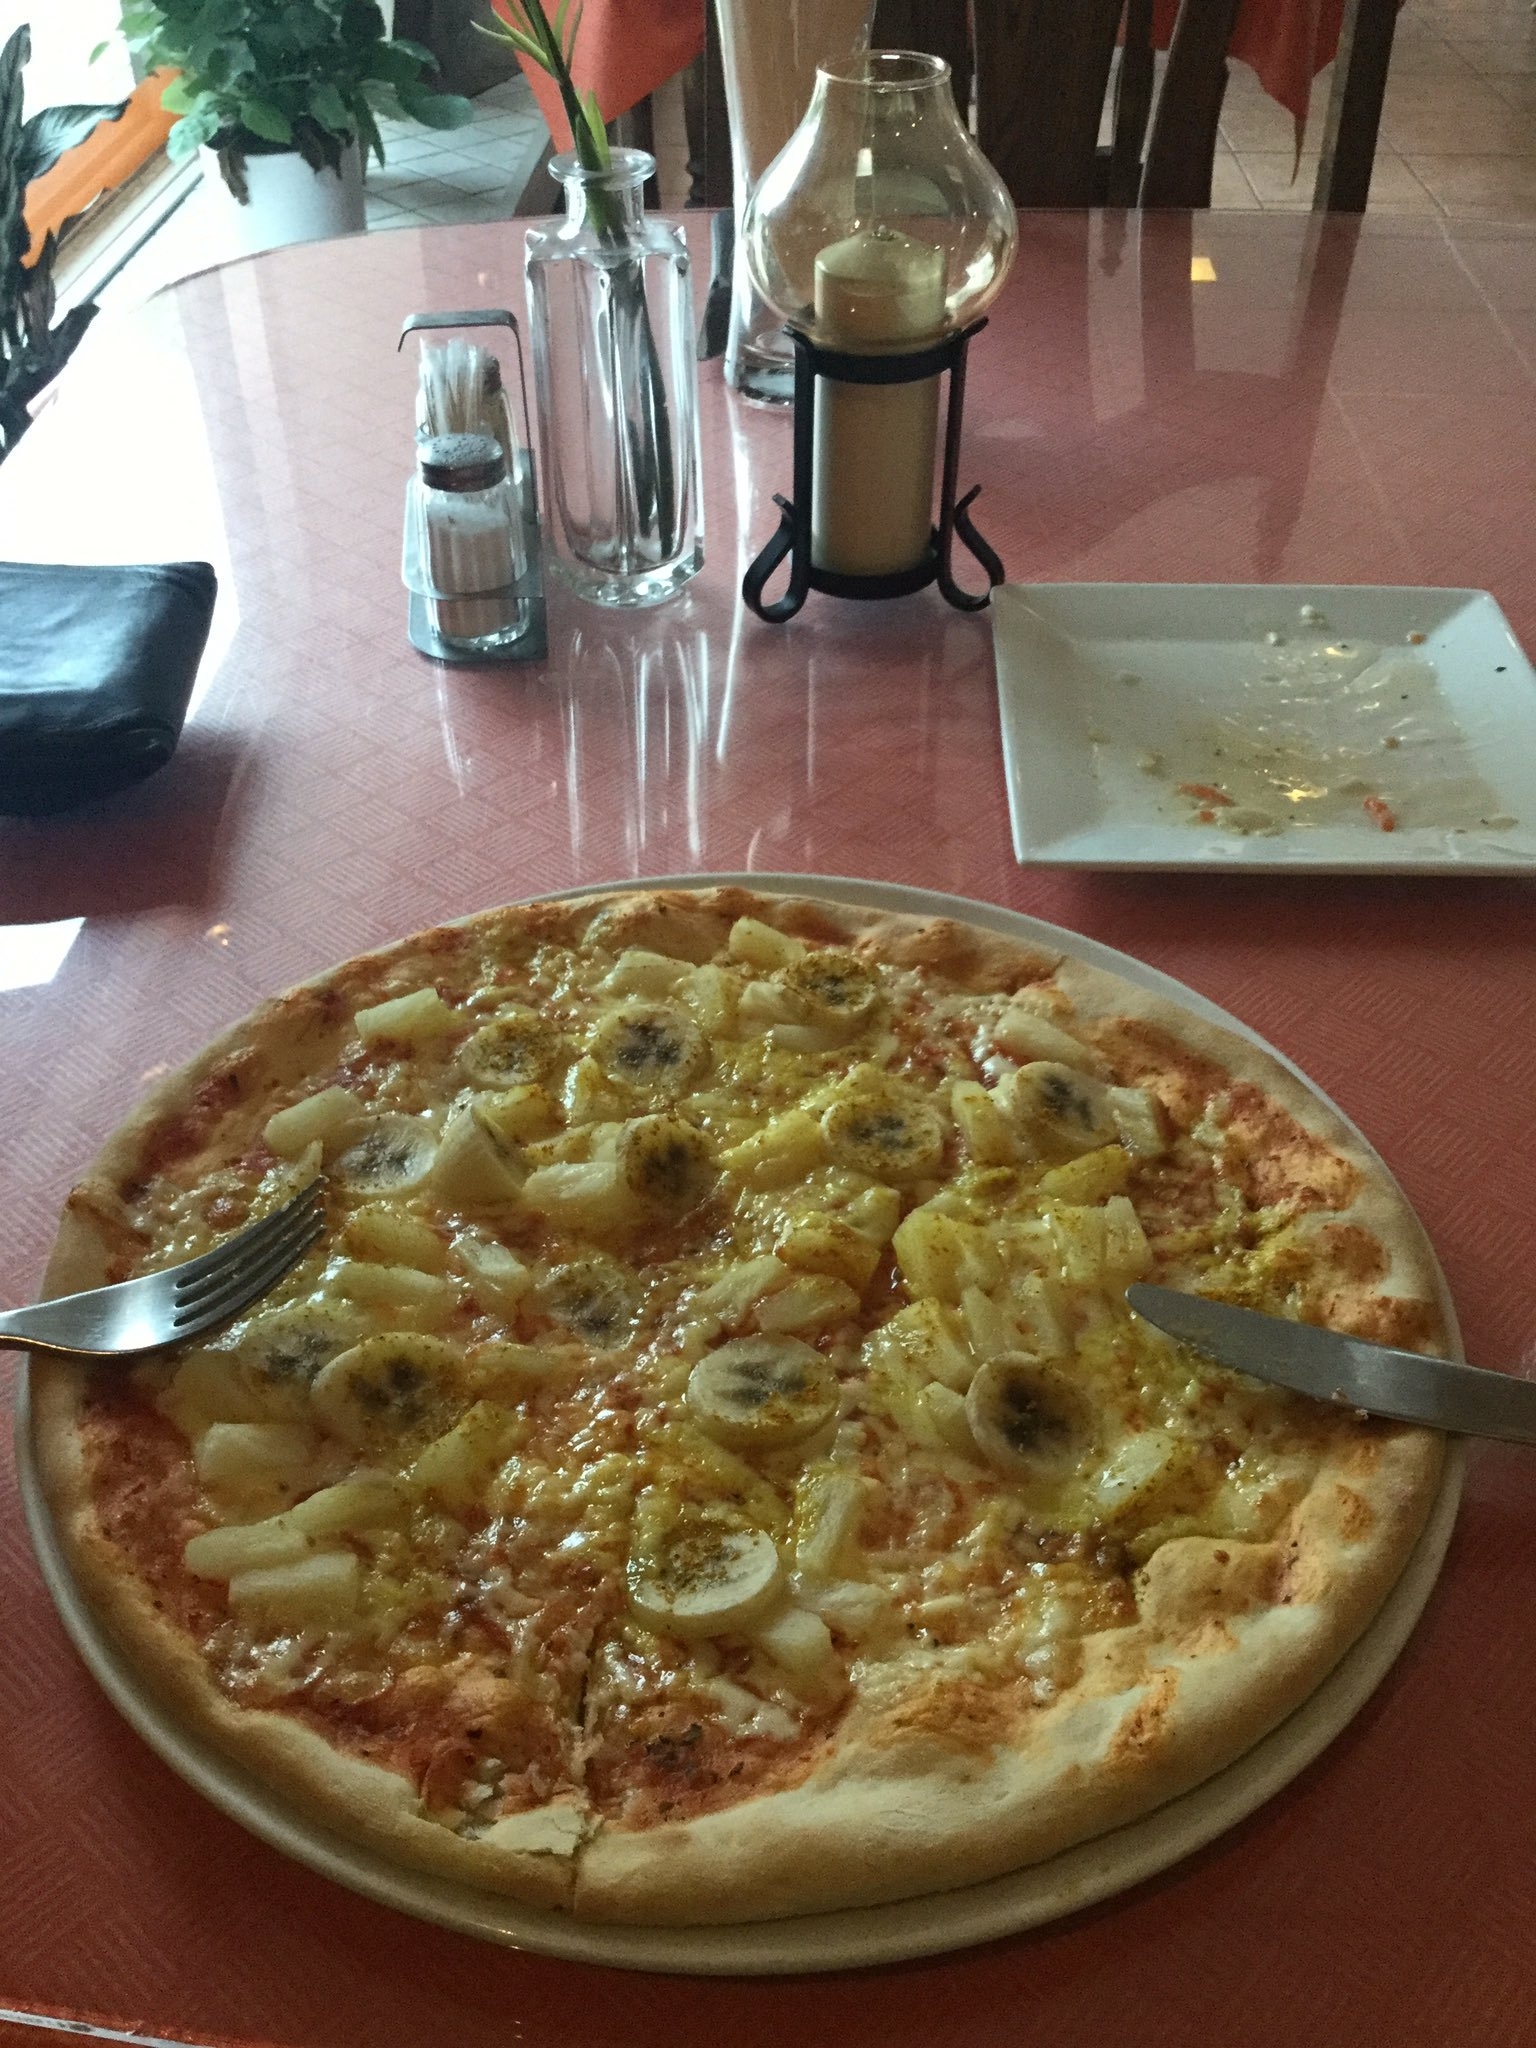 The internet is freaking out about Sweden's bizarre pizza toppings ...